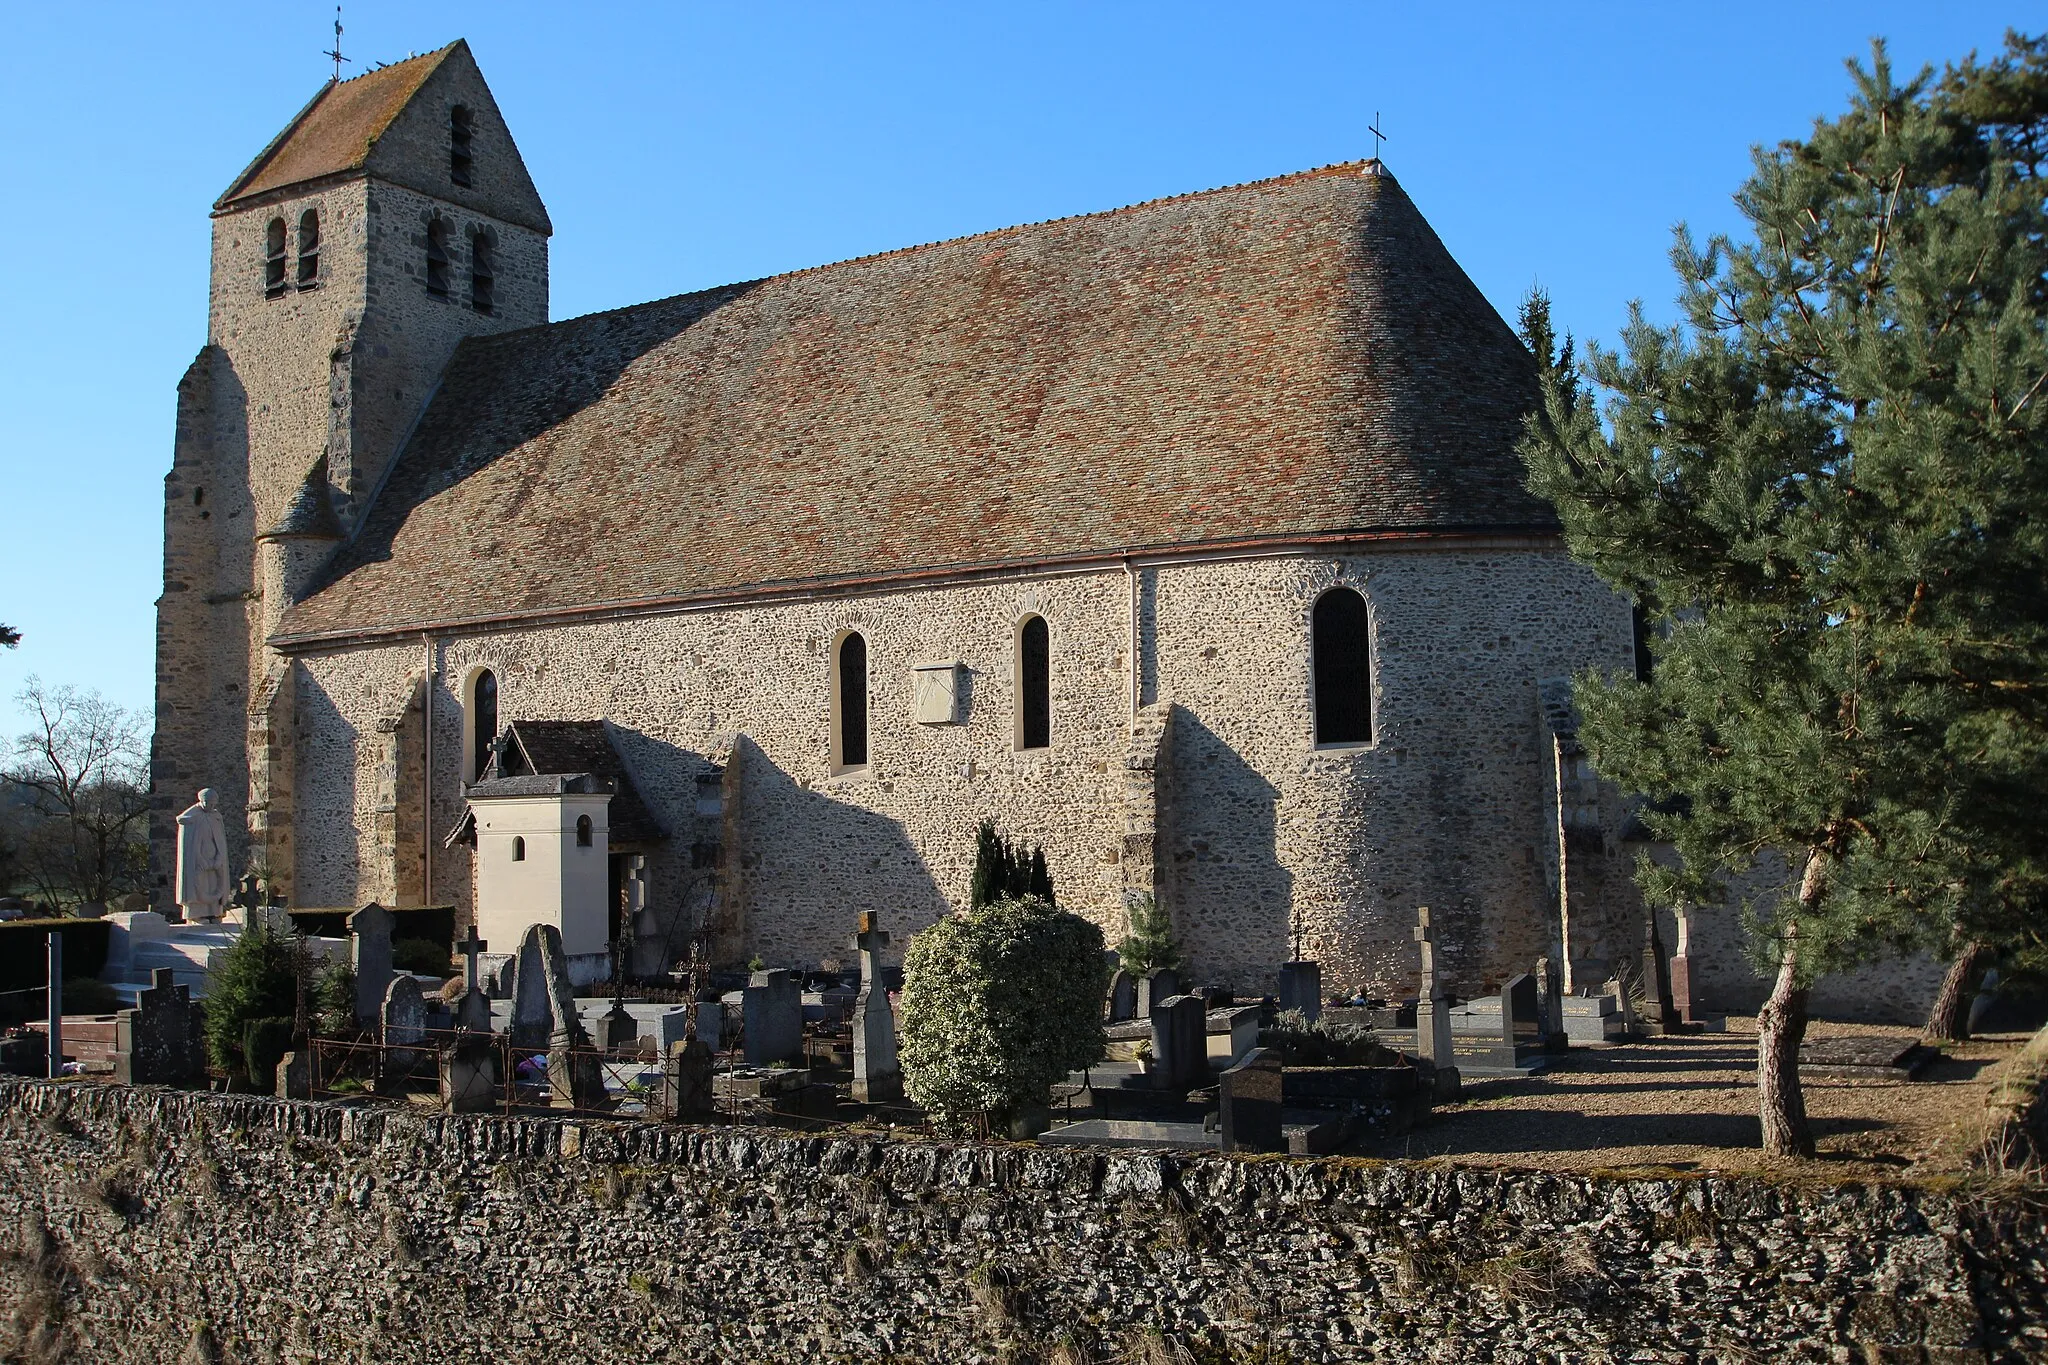 Photo showing: View of the Saint Martin church and cemetery in the village of Grosrouvre, France in march 2014.